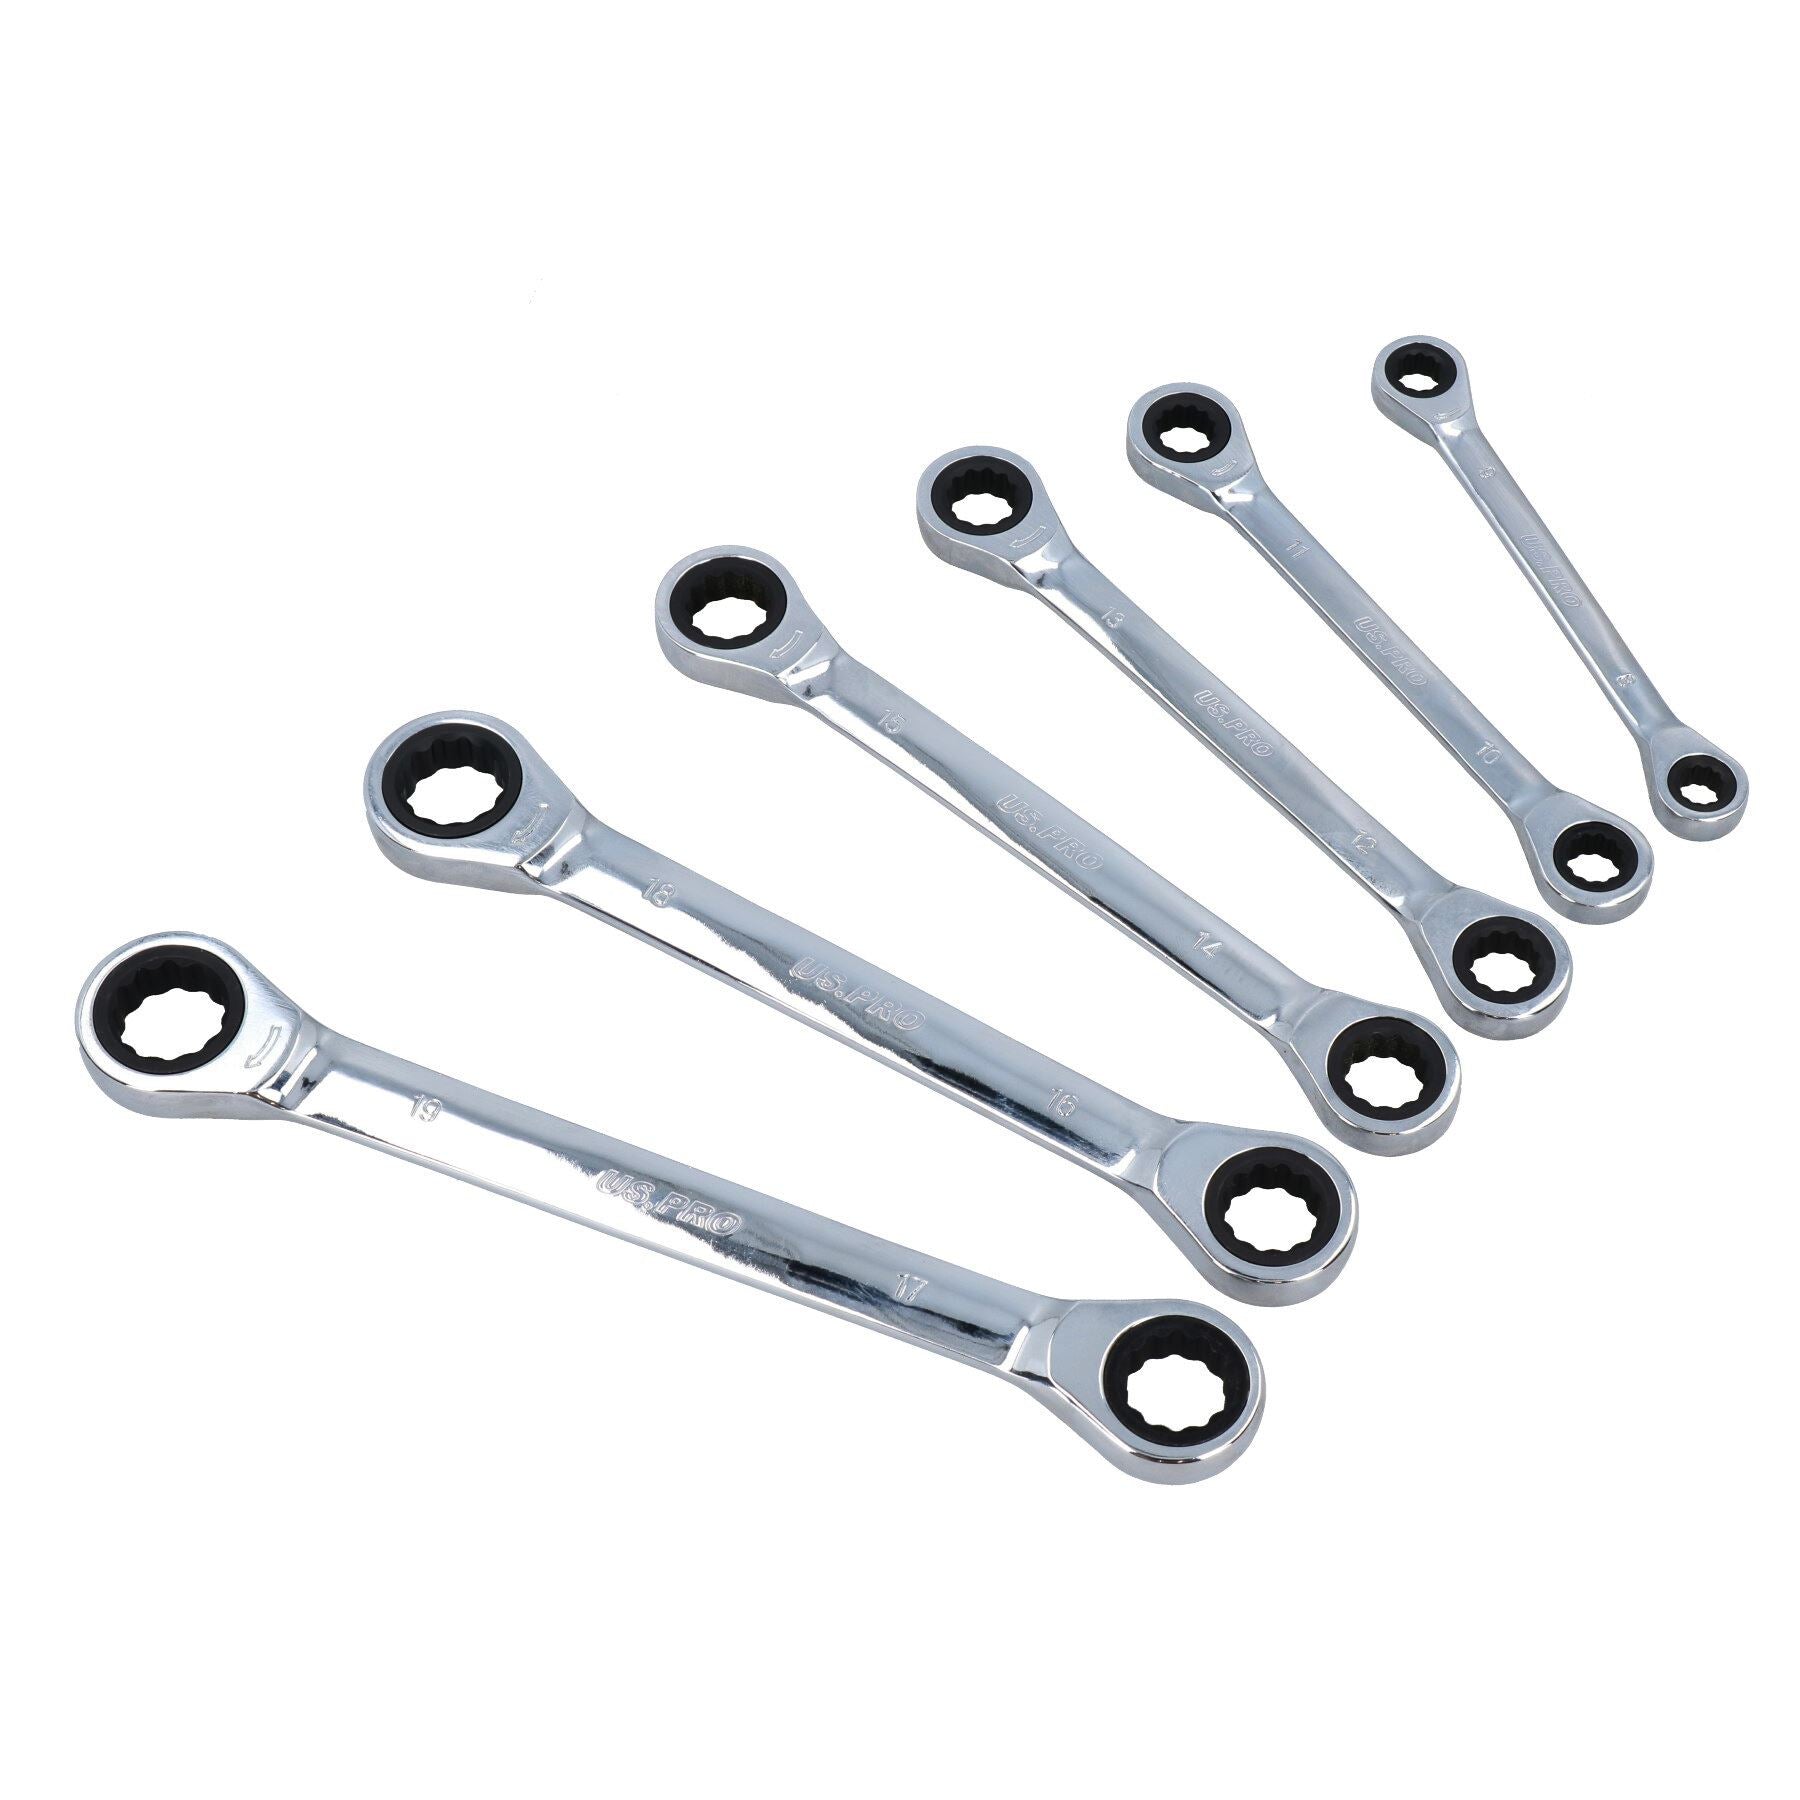 8mm – 19mm Double Ended Ring Gear Ratchet Spanner Wrench Set 6pc 12 Sizes